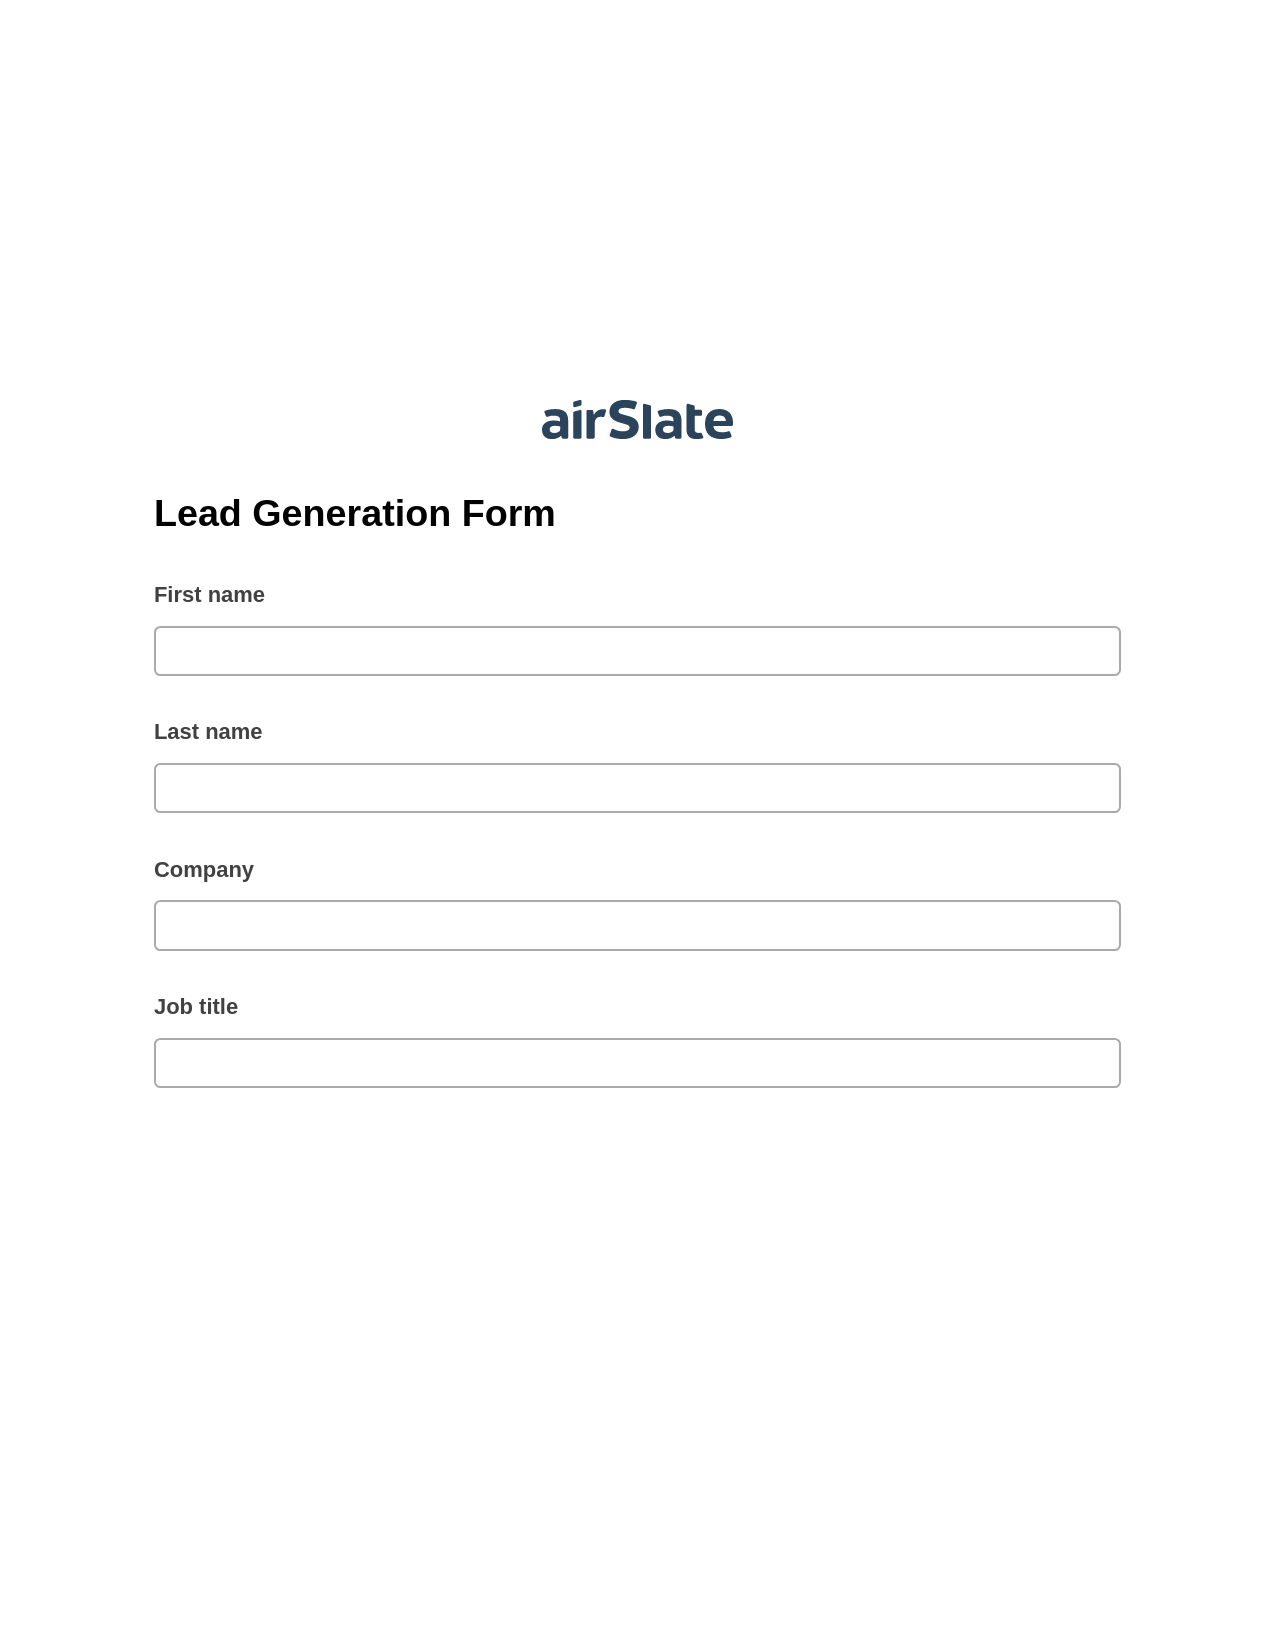 Lead Generation Form Pre-fill Document Bot, Send a Slate with Roles Bot, Export to Salesforce Record Bot